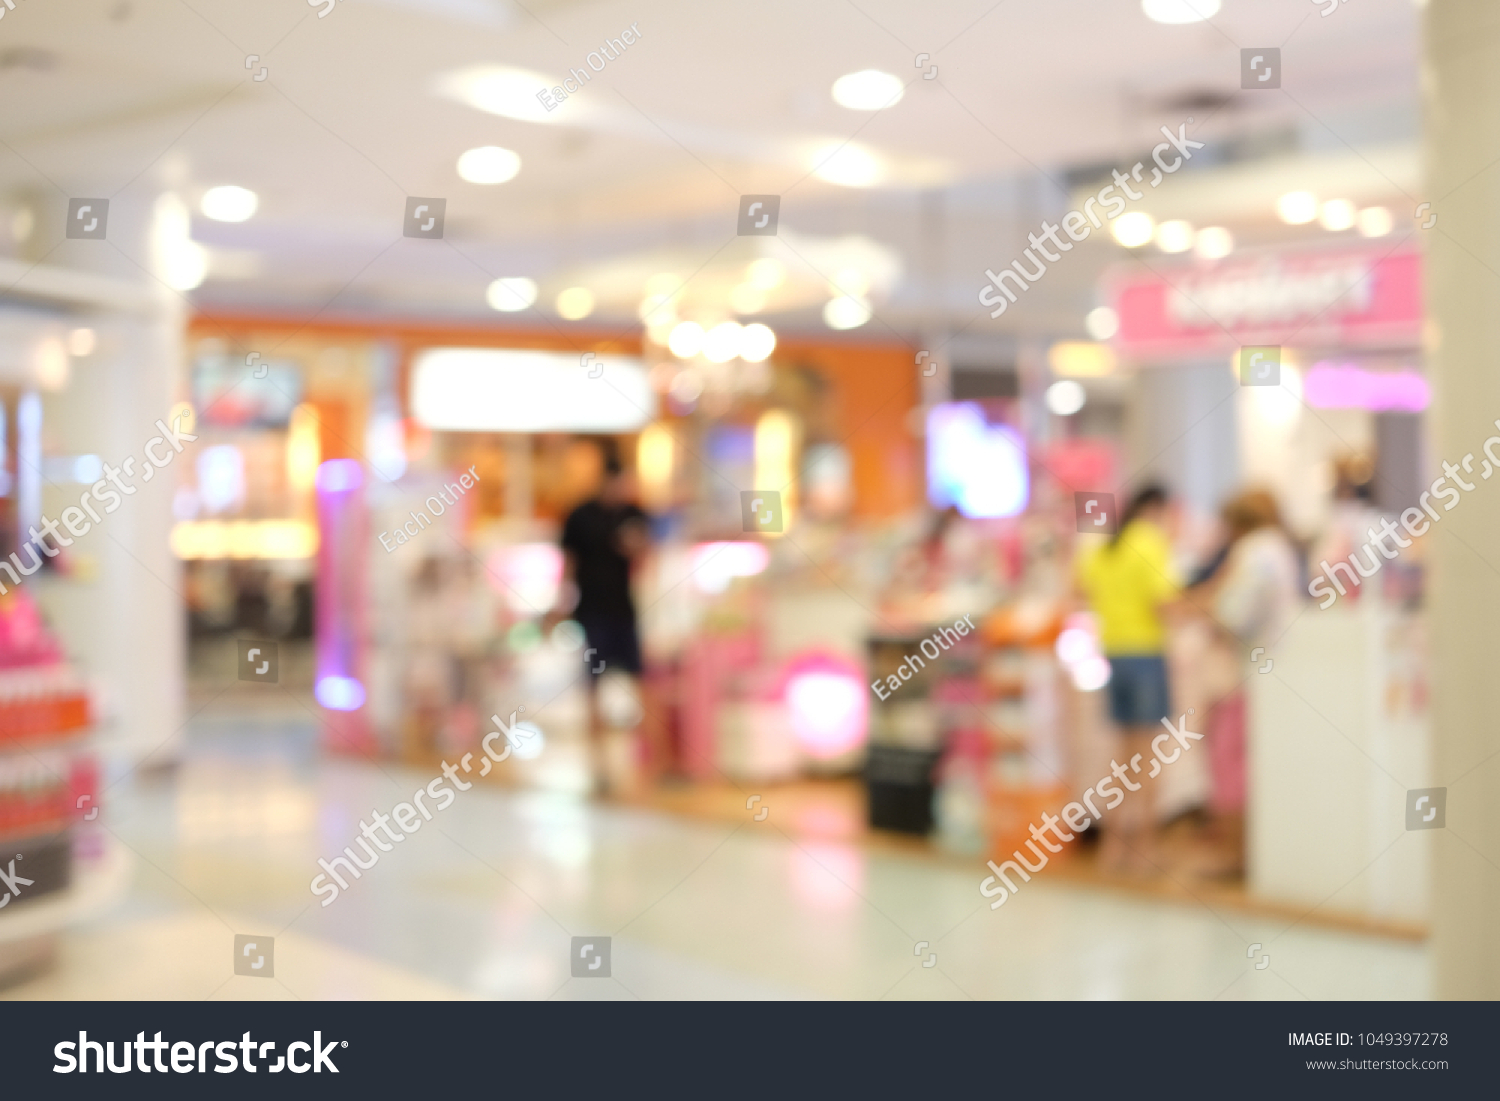 Abstract shopping mall bright bokeh background and retail store blur background, Image blur. Blurred shopping background. #1049397278